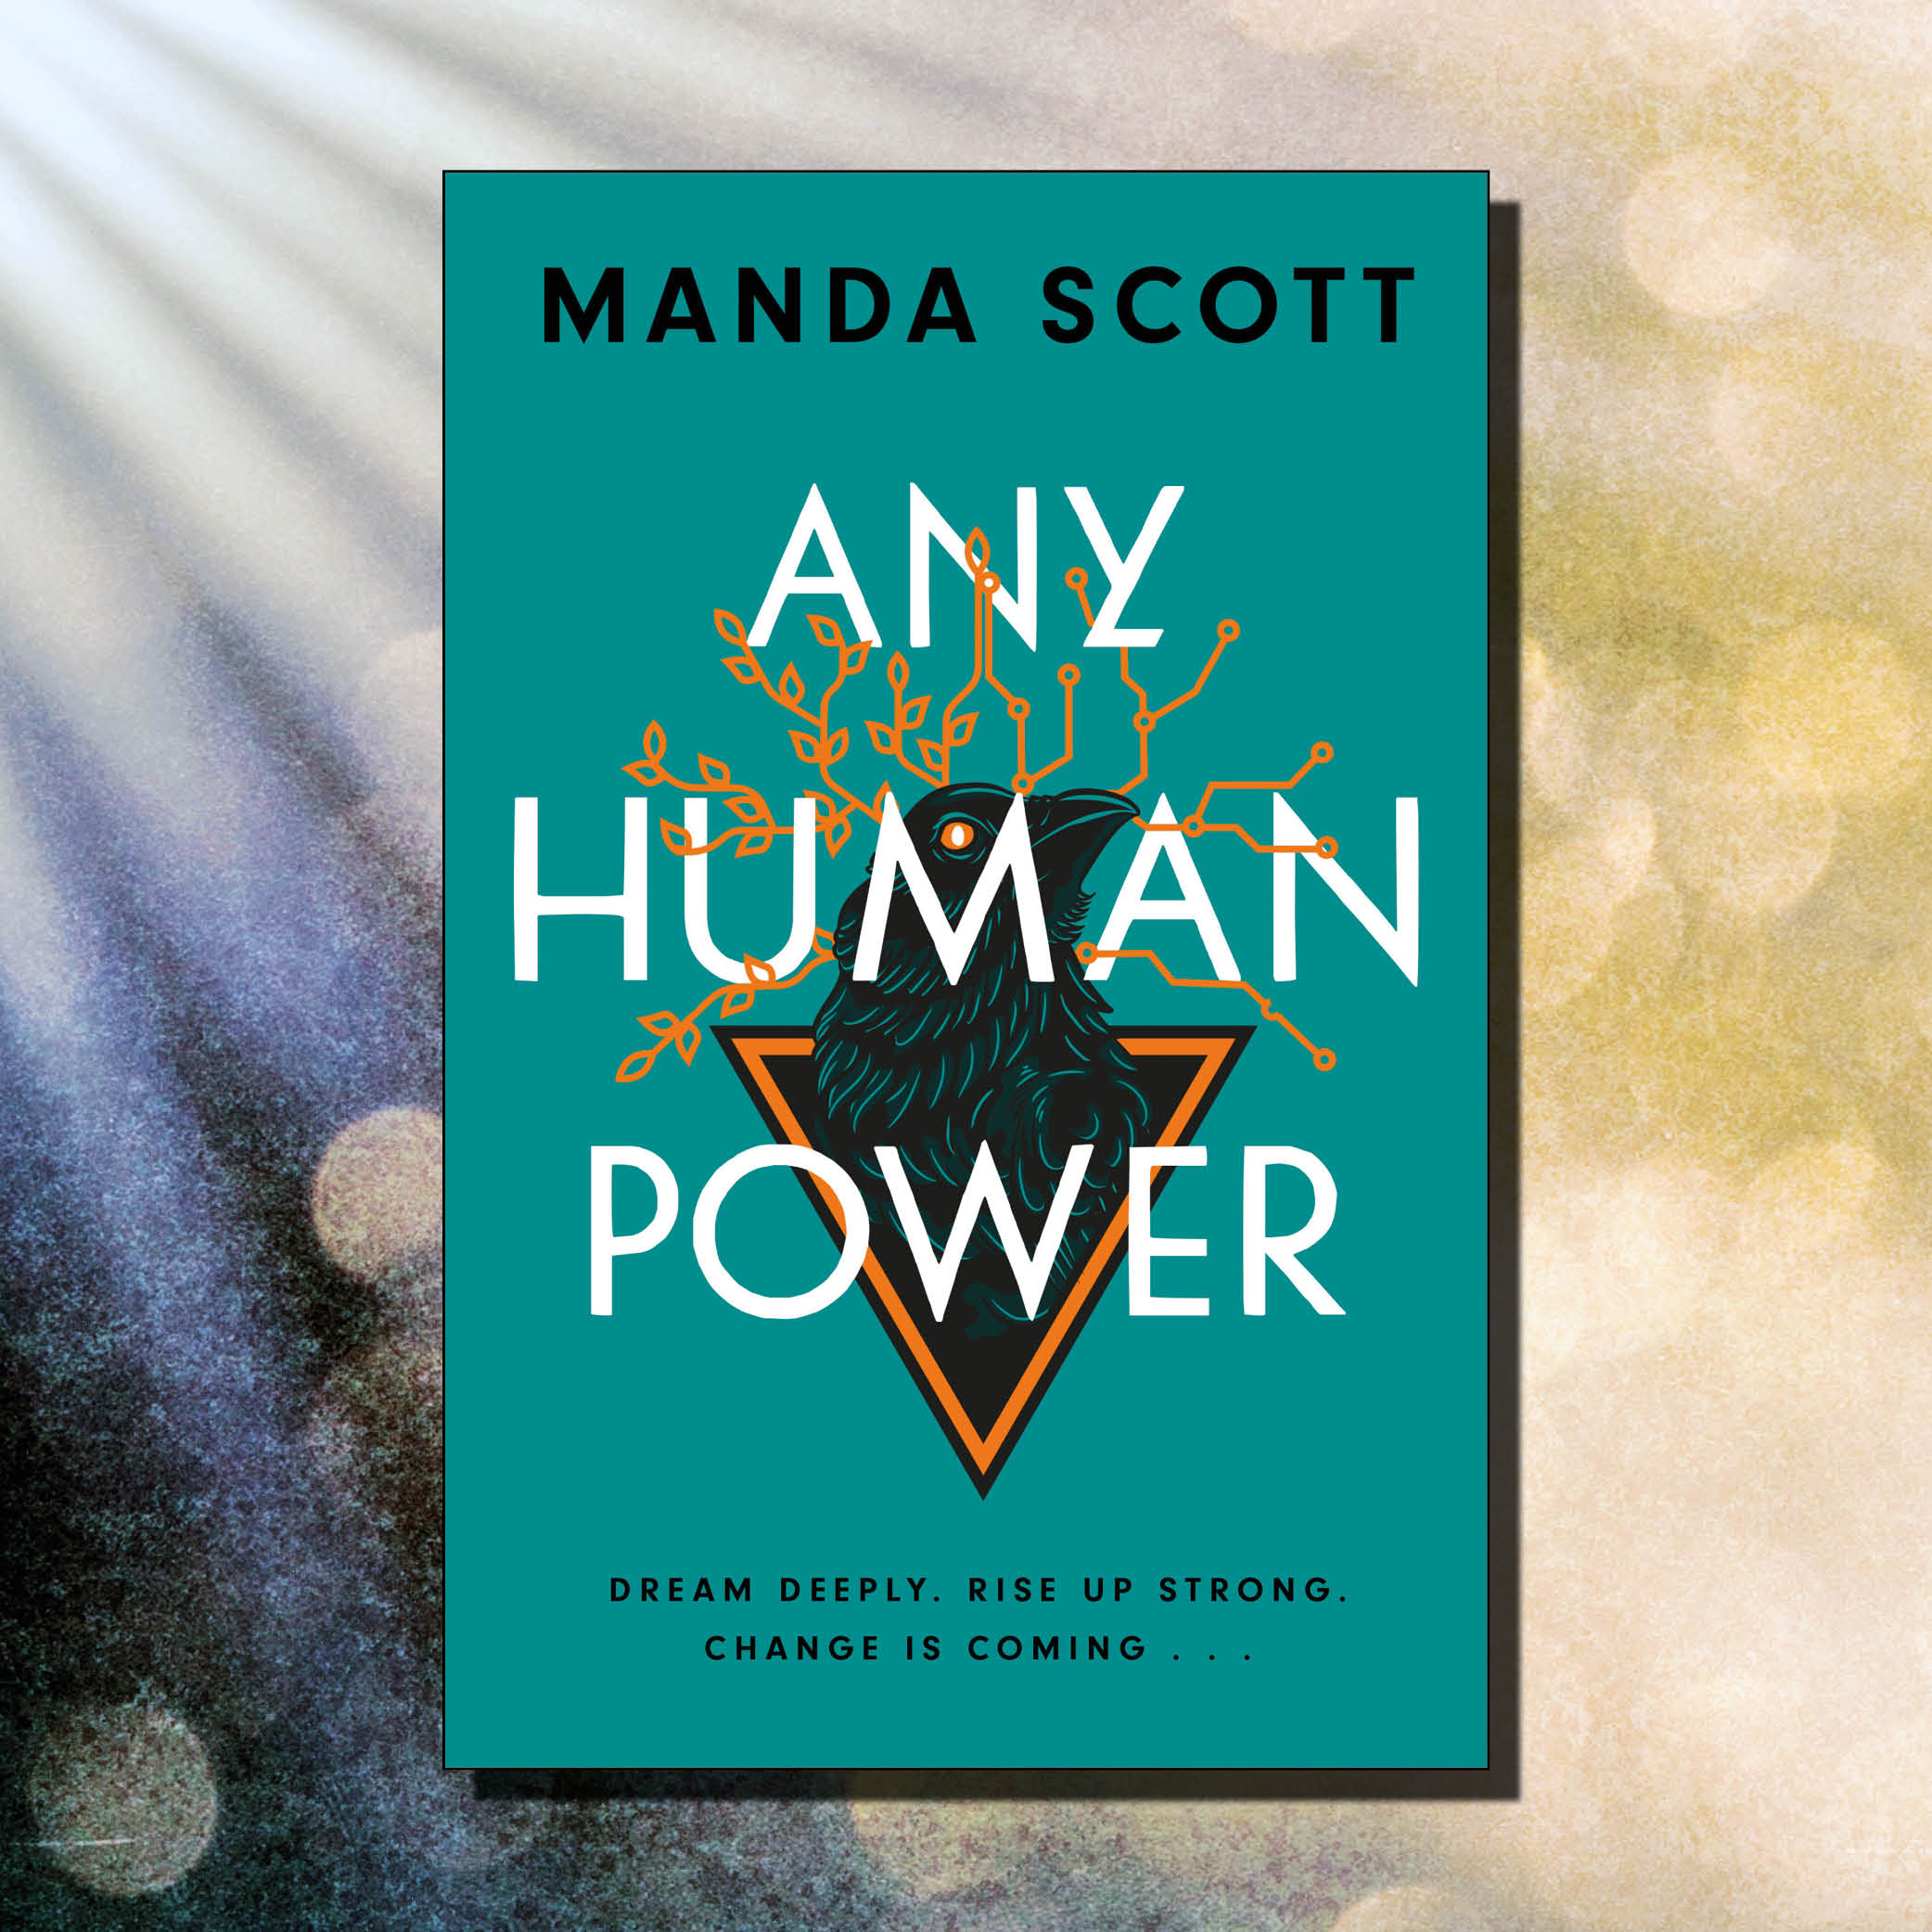 Any Human Power by Manda Scott – an outstanding book for change